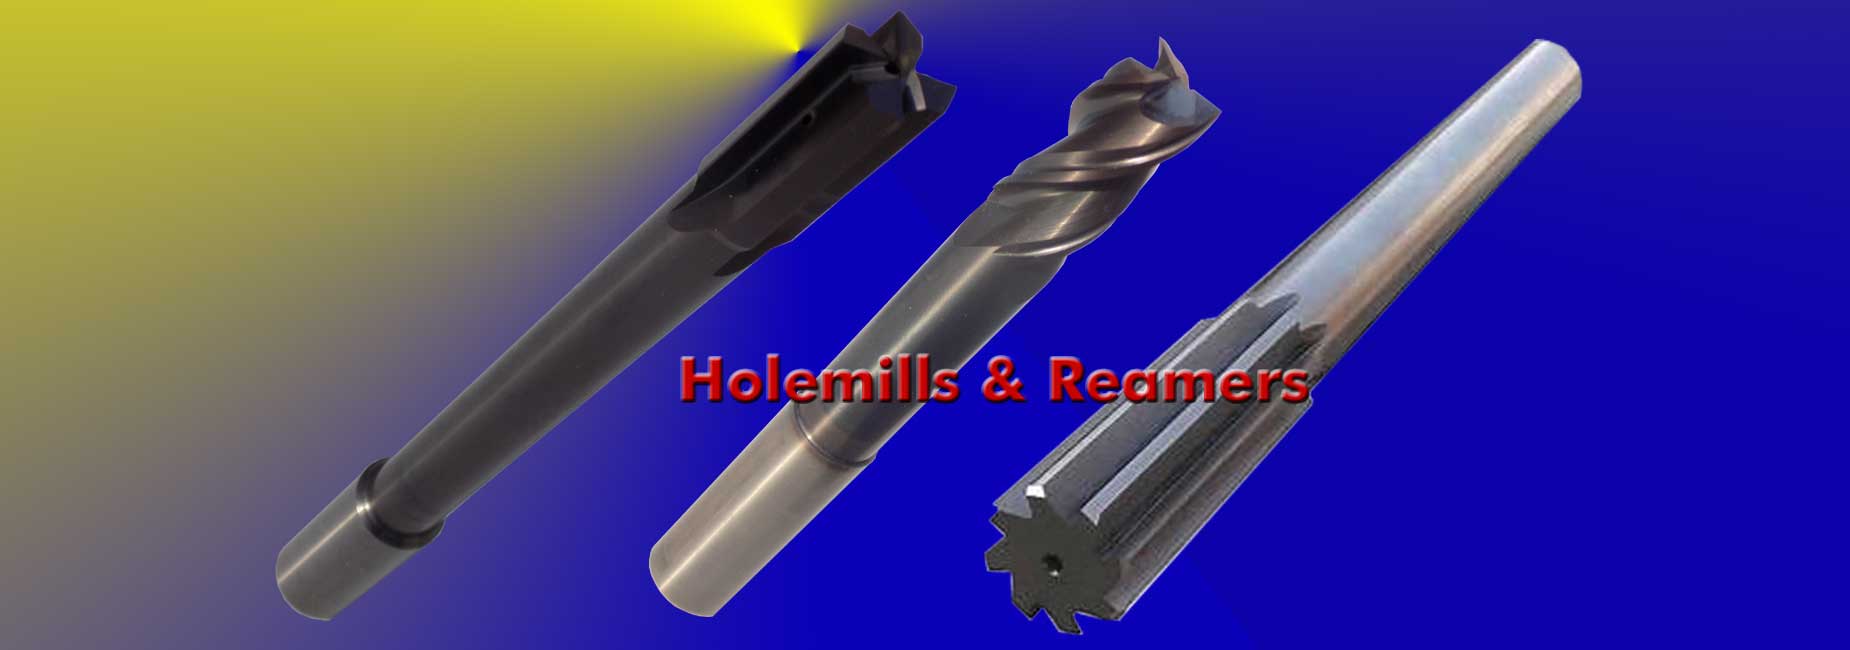 Holemills & Reamers1850x650px